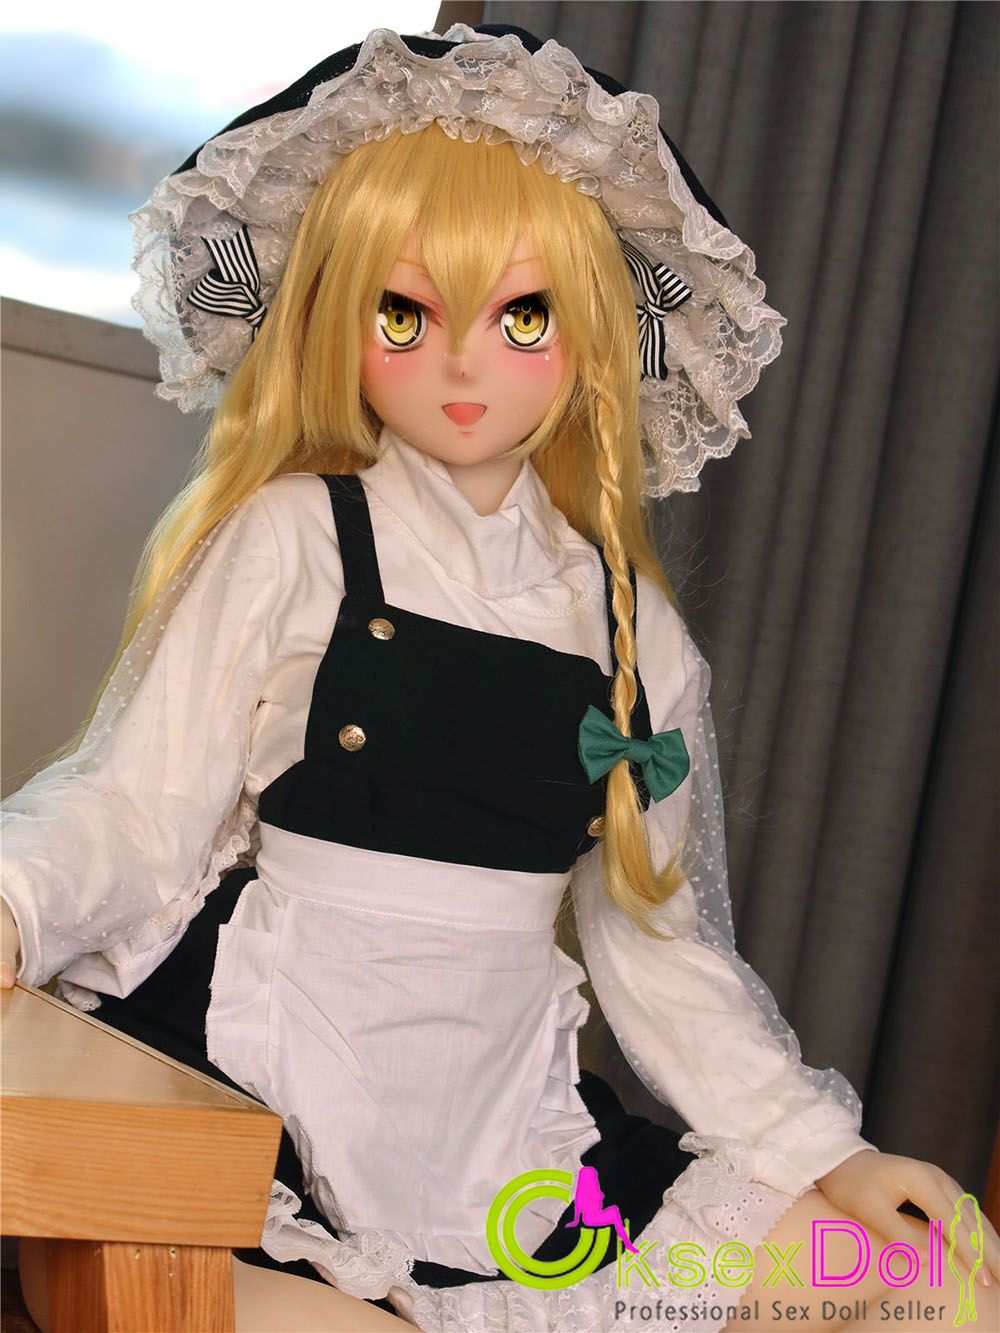 Anime Love Doll Picture of 『Tamiko』